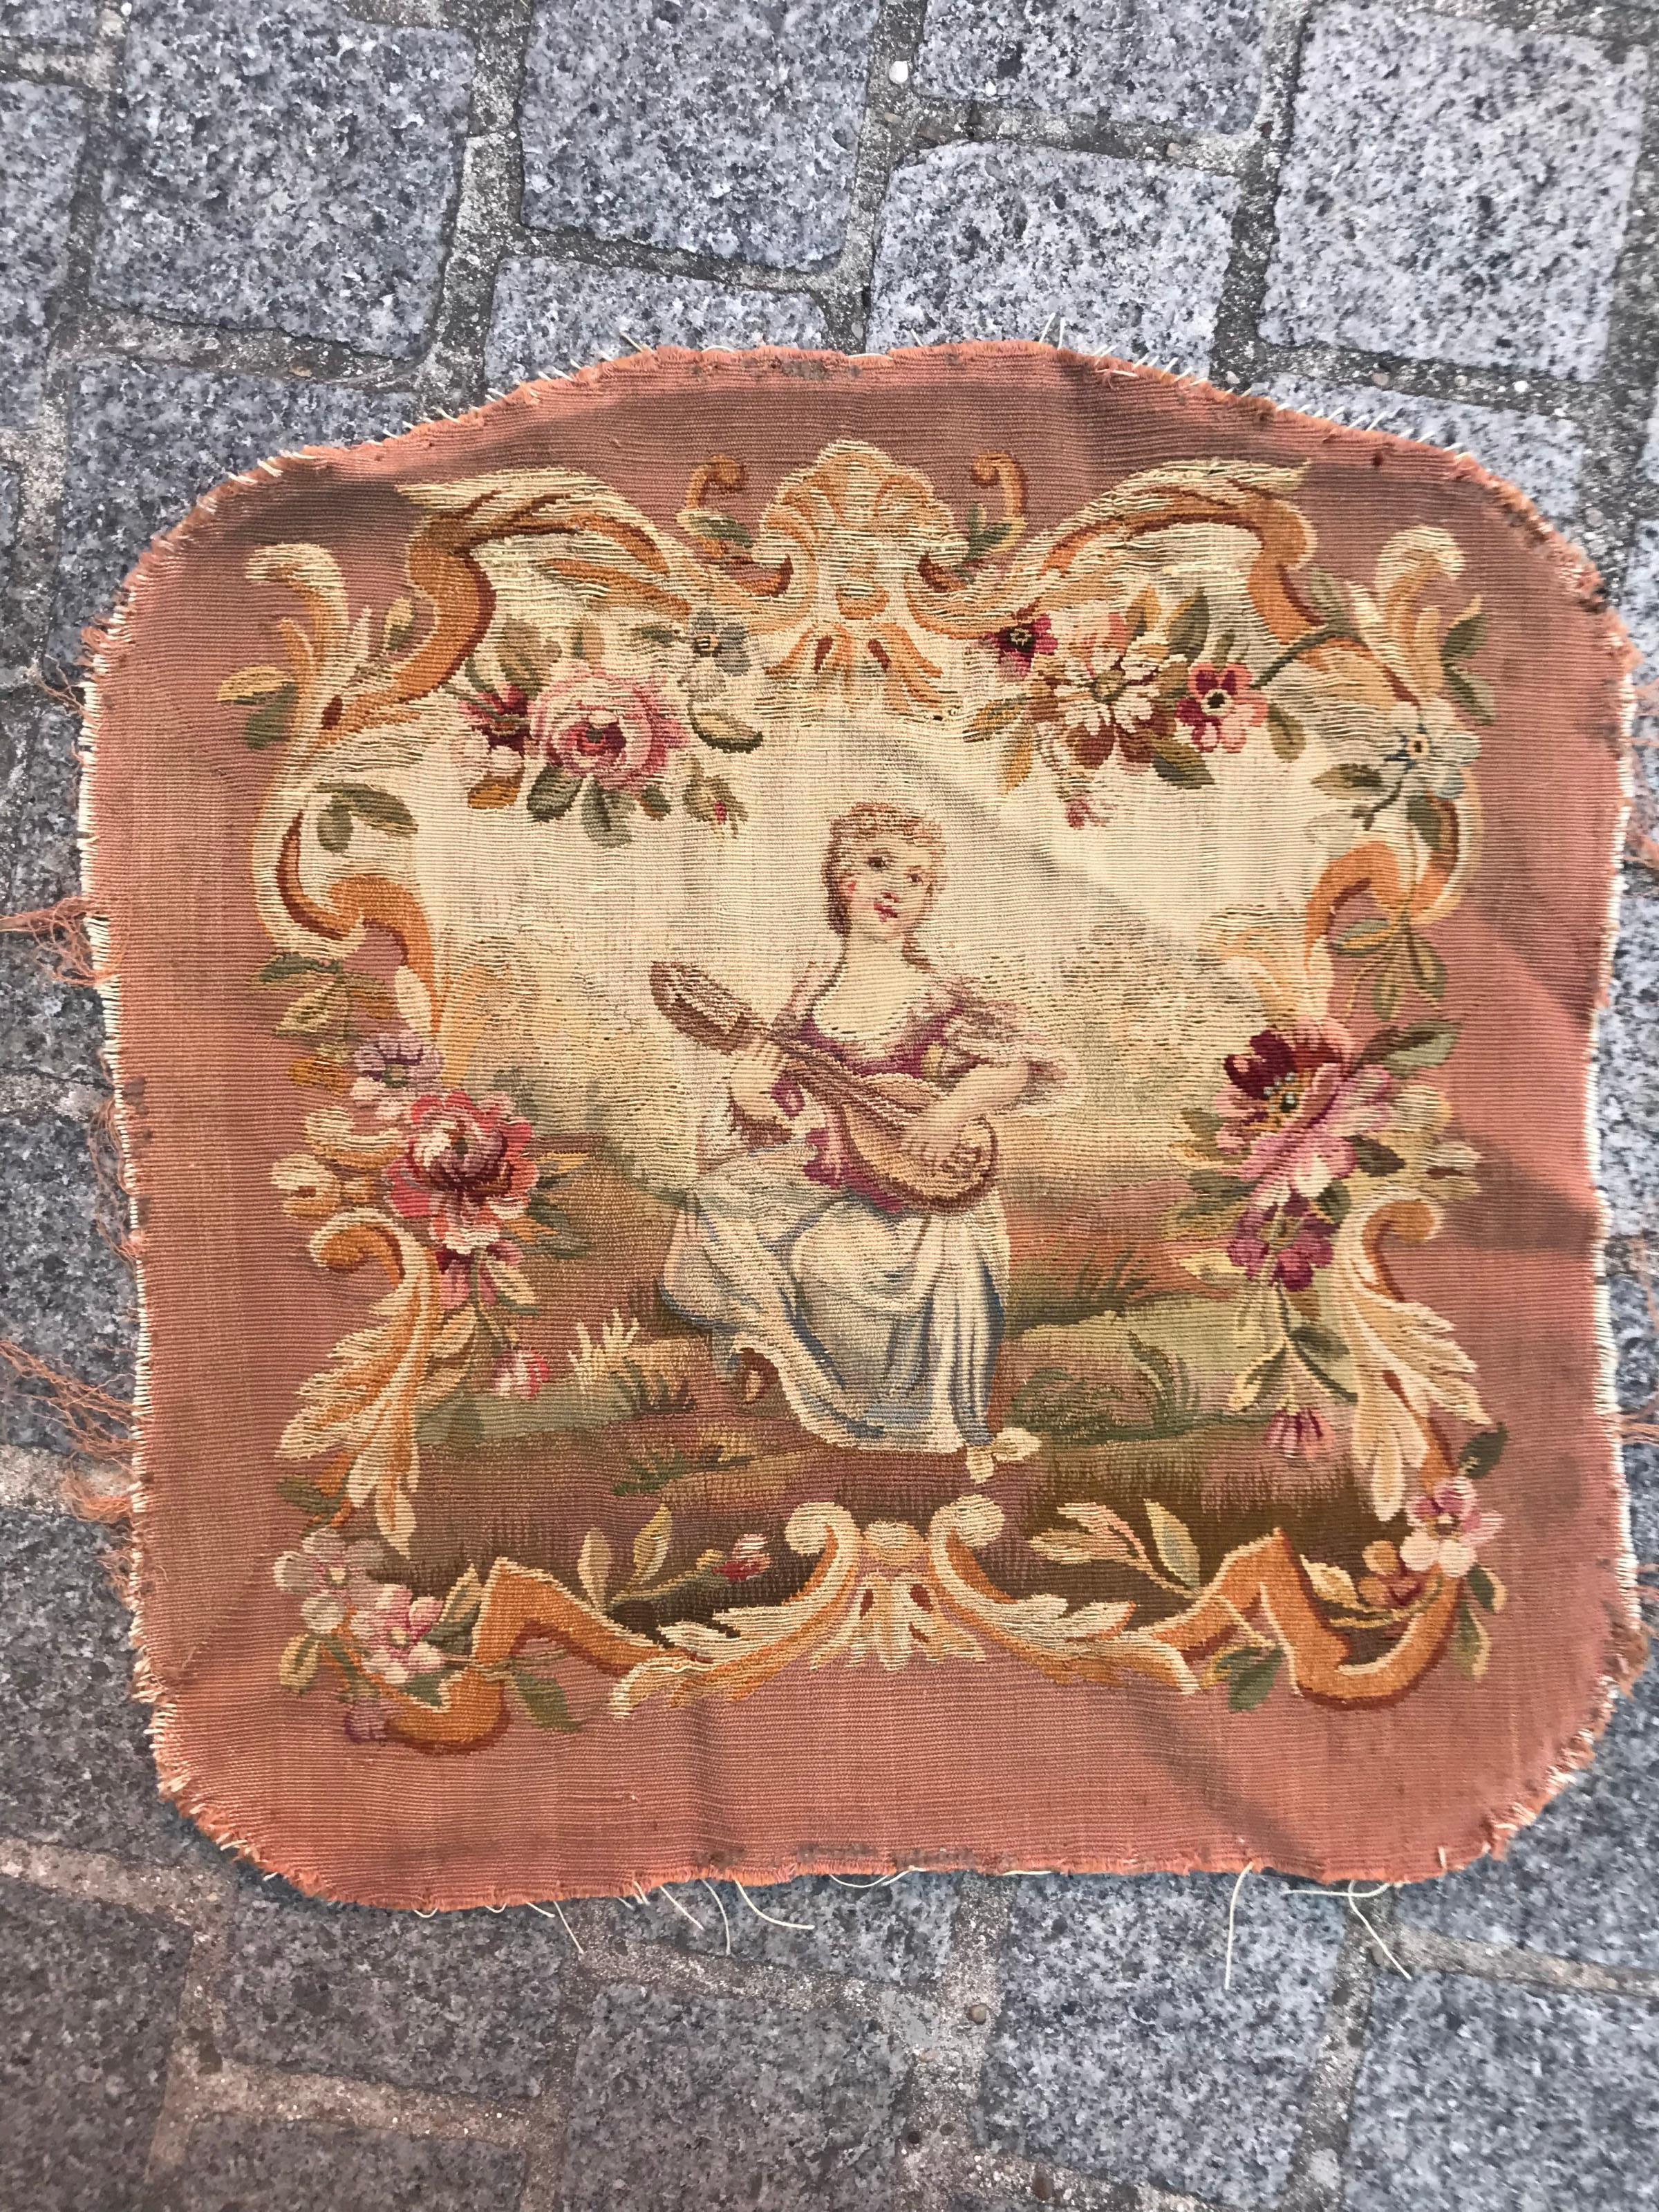 Very beautiful late 19th century Aubusson tapestry with a beautiful design and colors, wool and silk woven on cotton foundation.

✨✨✨
